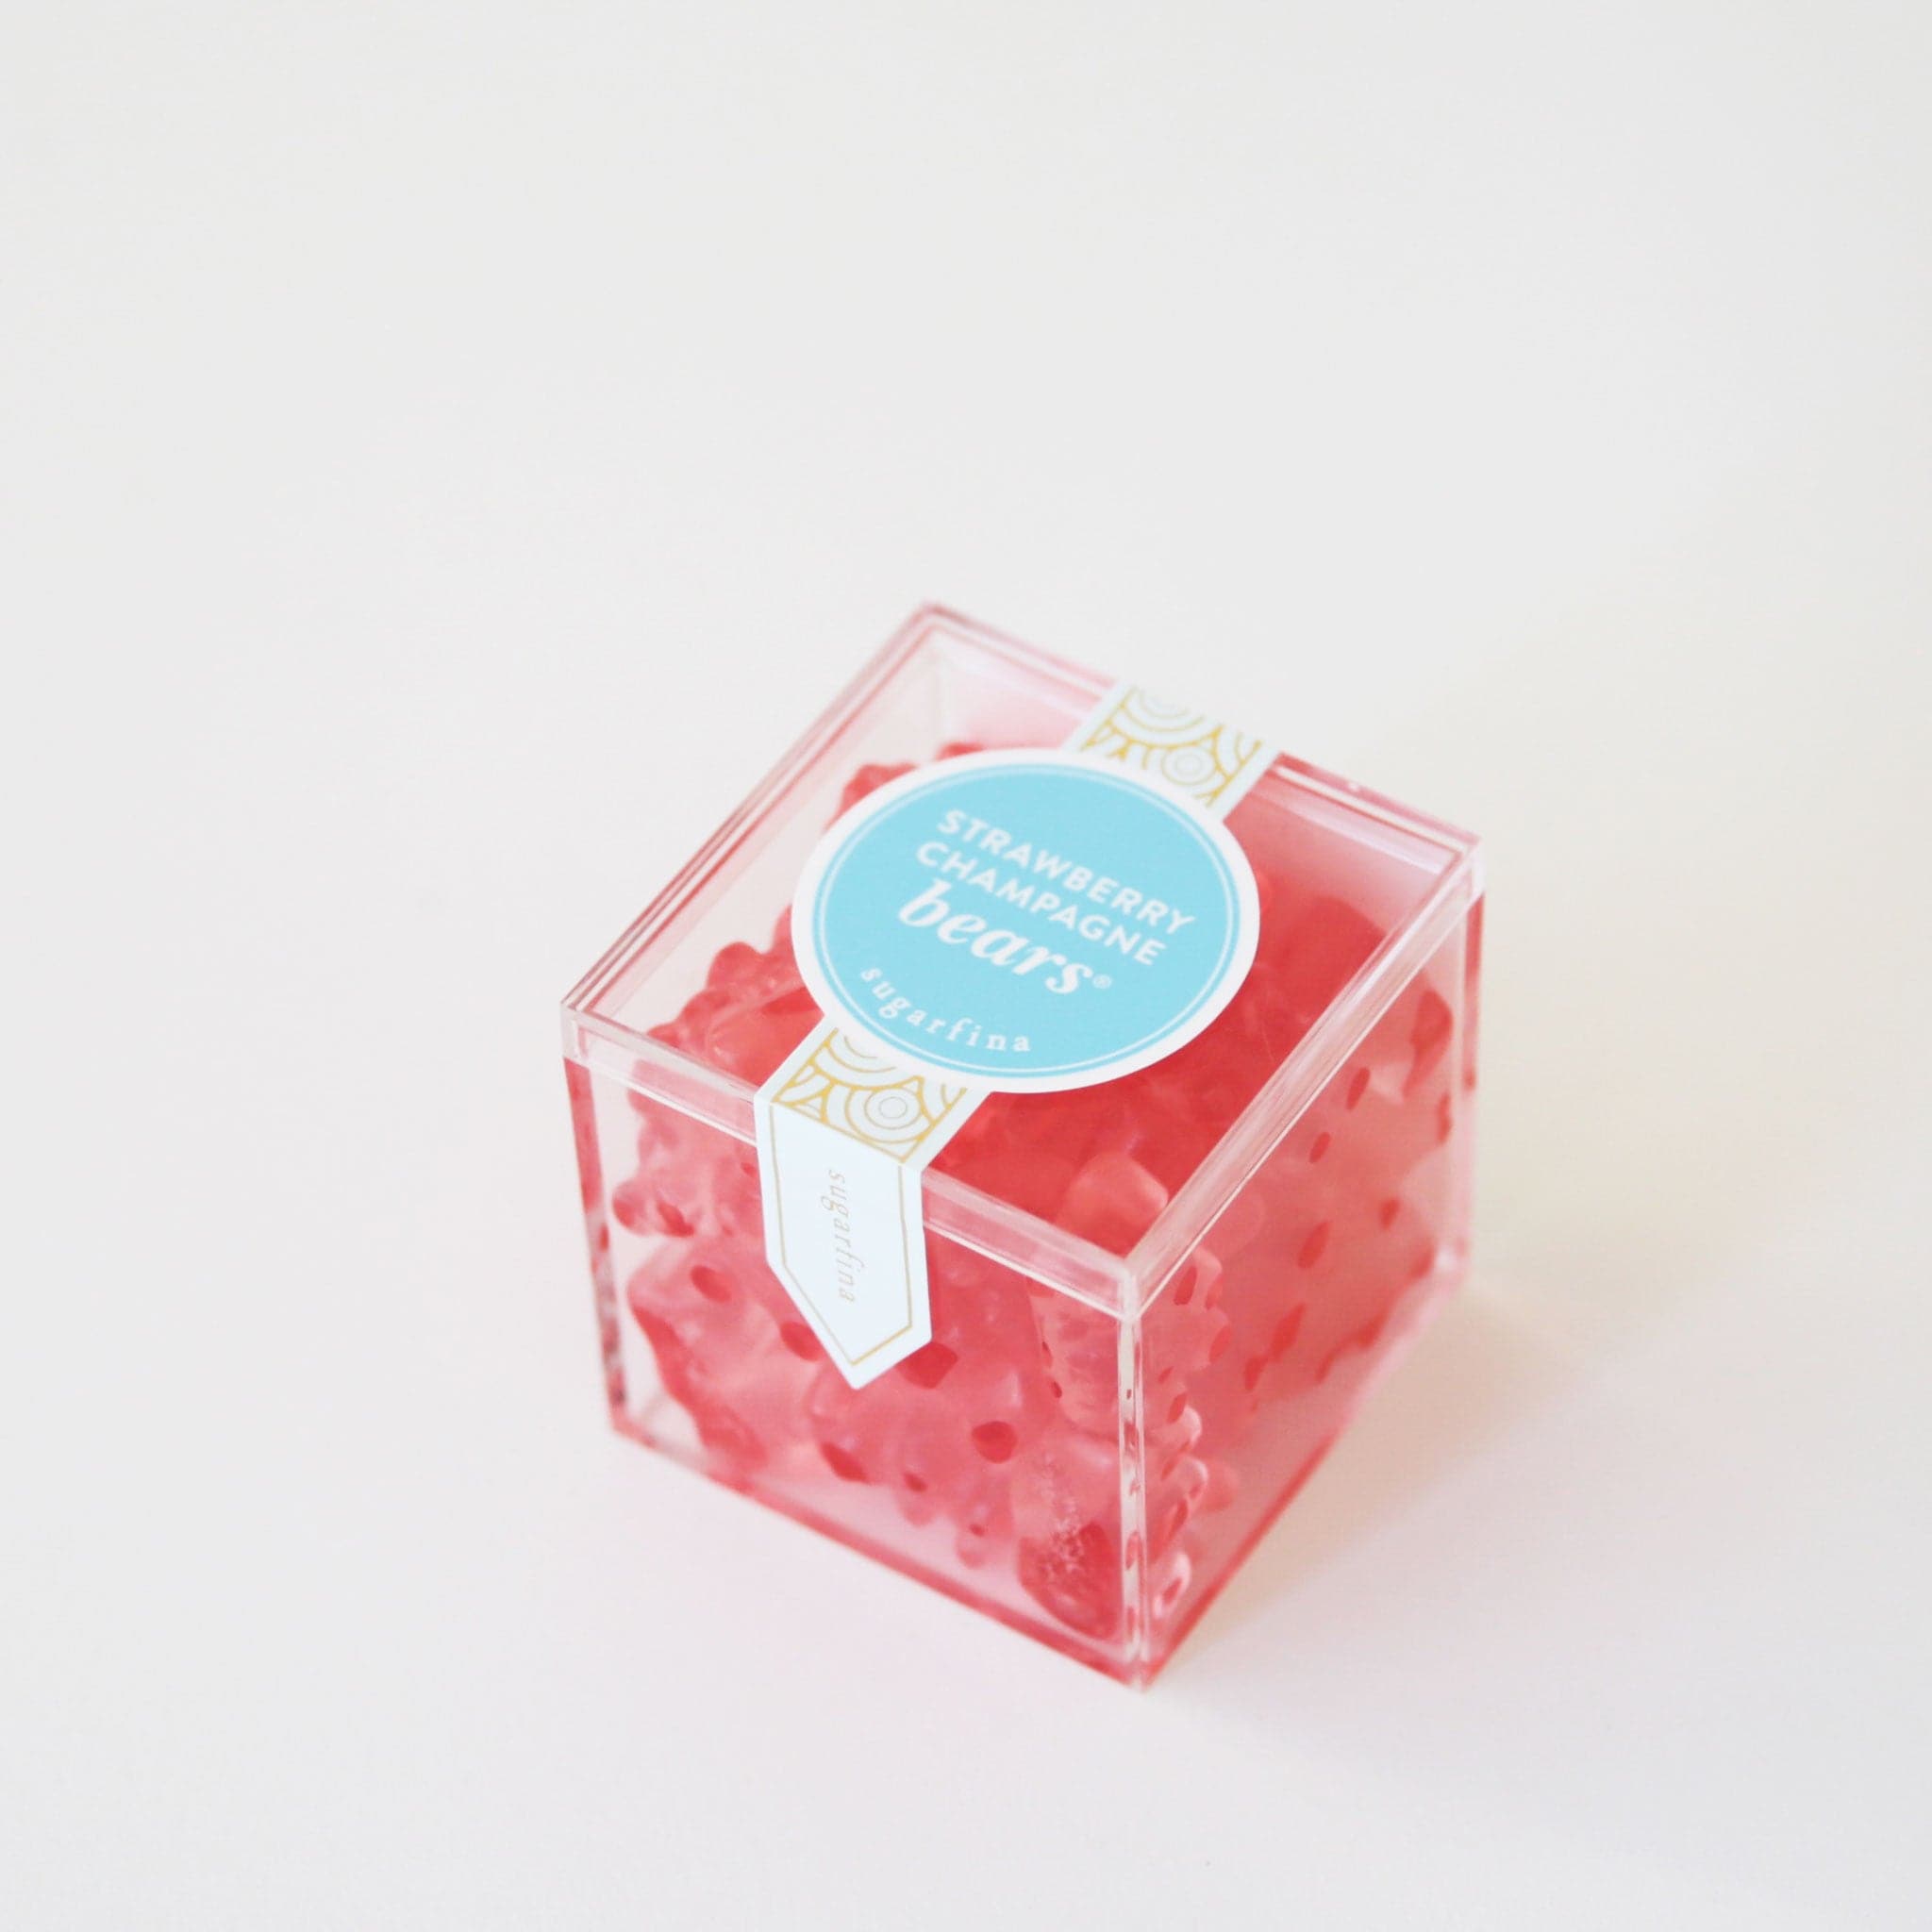 Strawberry champagne gummy bears packaged in an acrylic box.